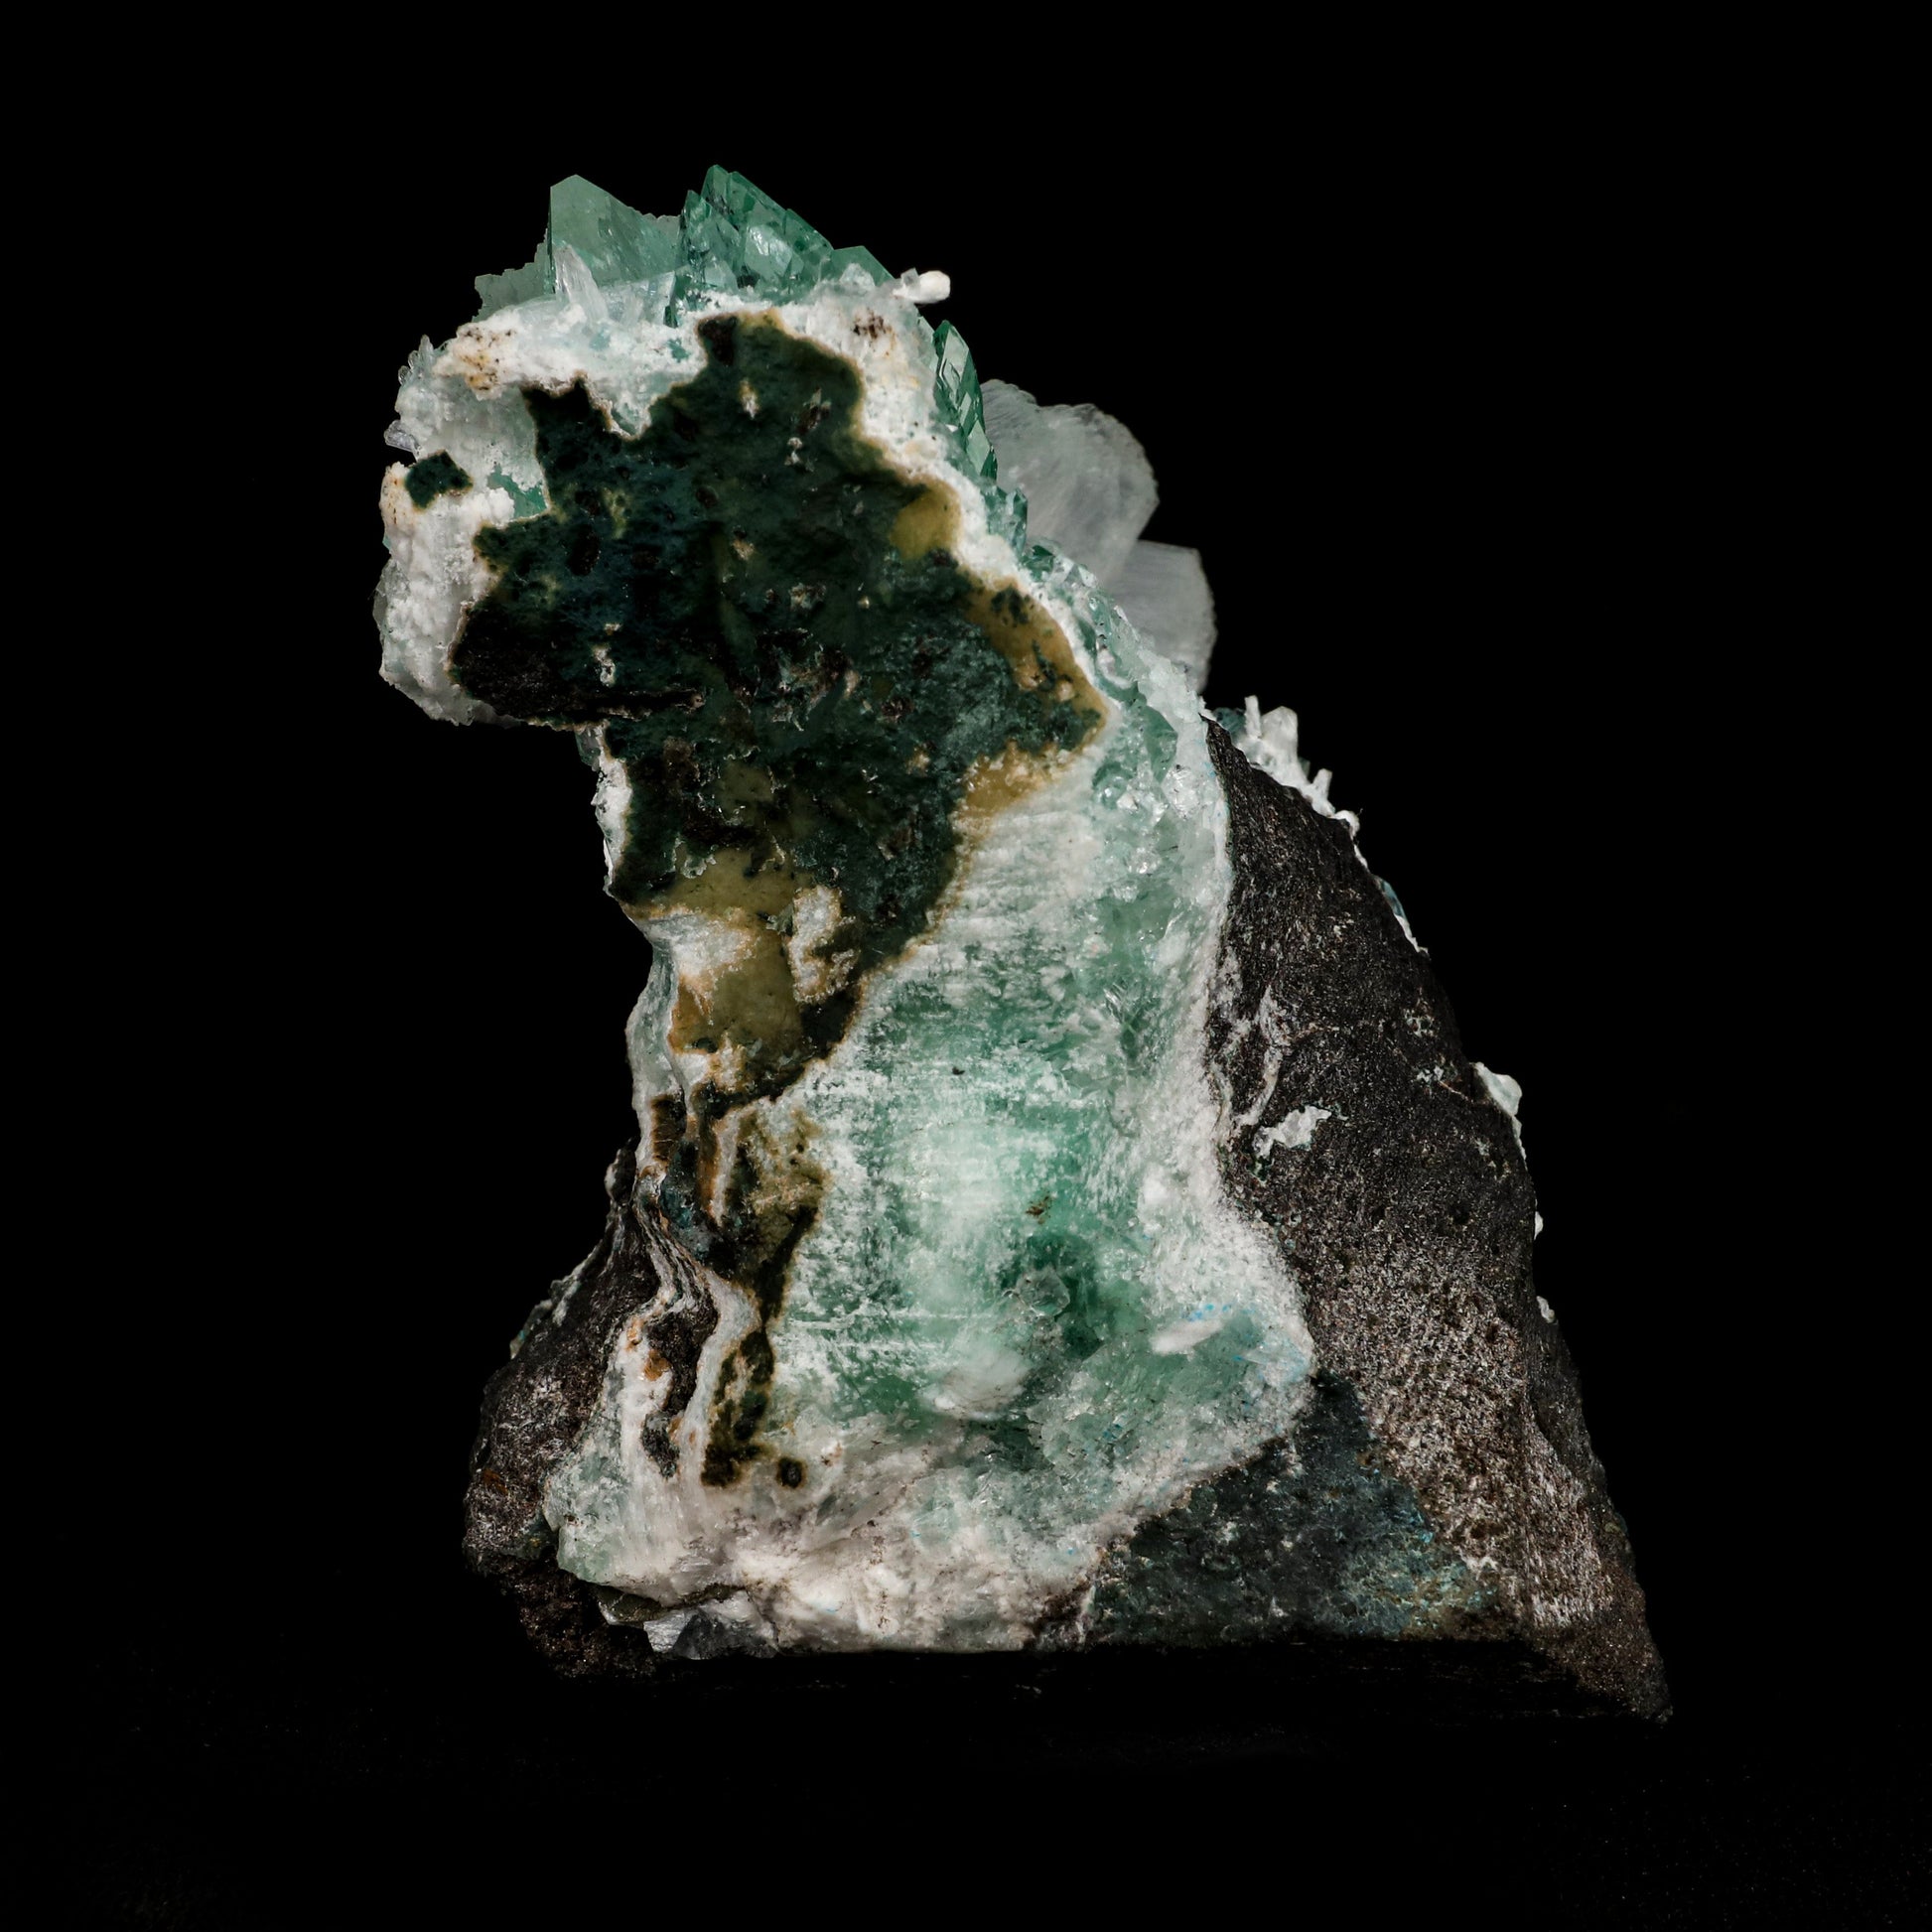 Green Fluorapophyllite and Stilbite Natural Mineral Specimen # B 507…  https://www.superbminerals.us/products/green-apophyllite-with-stilbite-natural-mineral-specimen-b-5070  Features: A fine oldtimer from theQuarry of the style of some of the earliest gem apophyllites that came out, totally unique in style and unequaled today! On a basaltic matrix are rosette-like clusters of glassy and gemmy, mint-green fluorapophyllite, to&nbsp; in length. Several doubly terminated, lustrous 